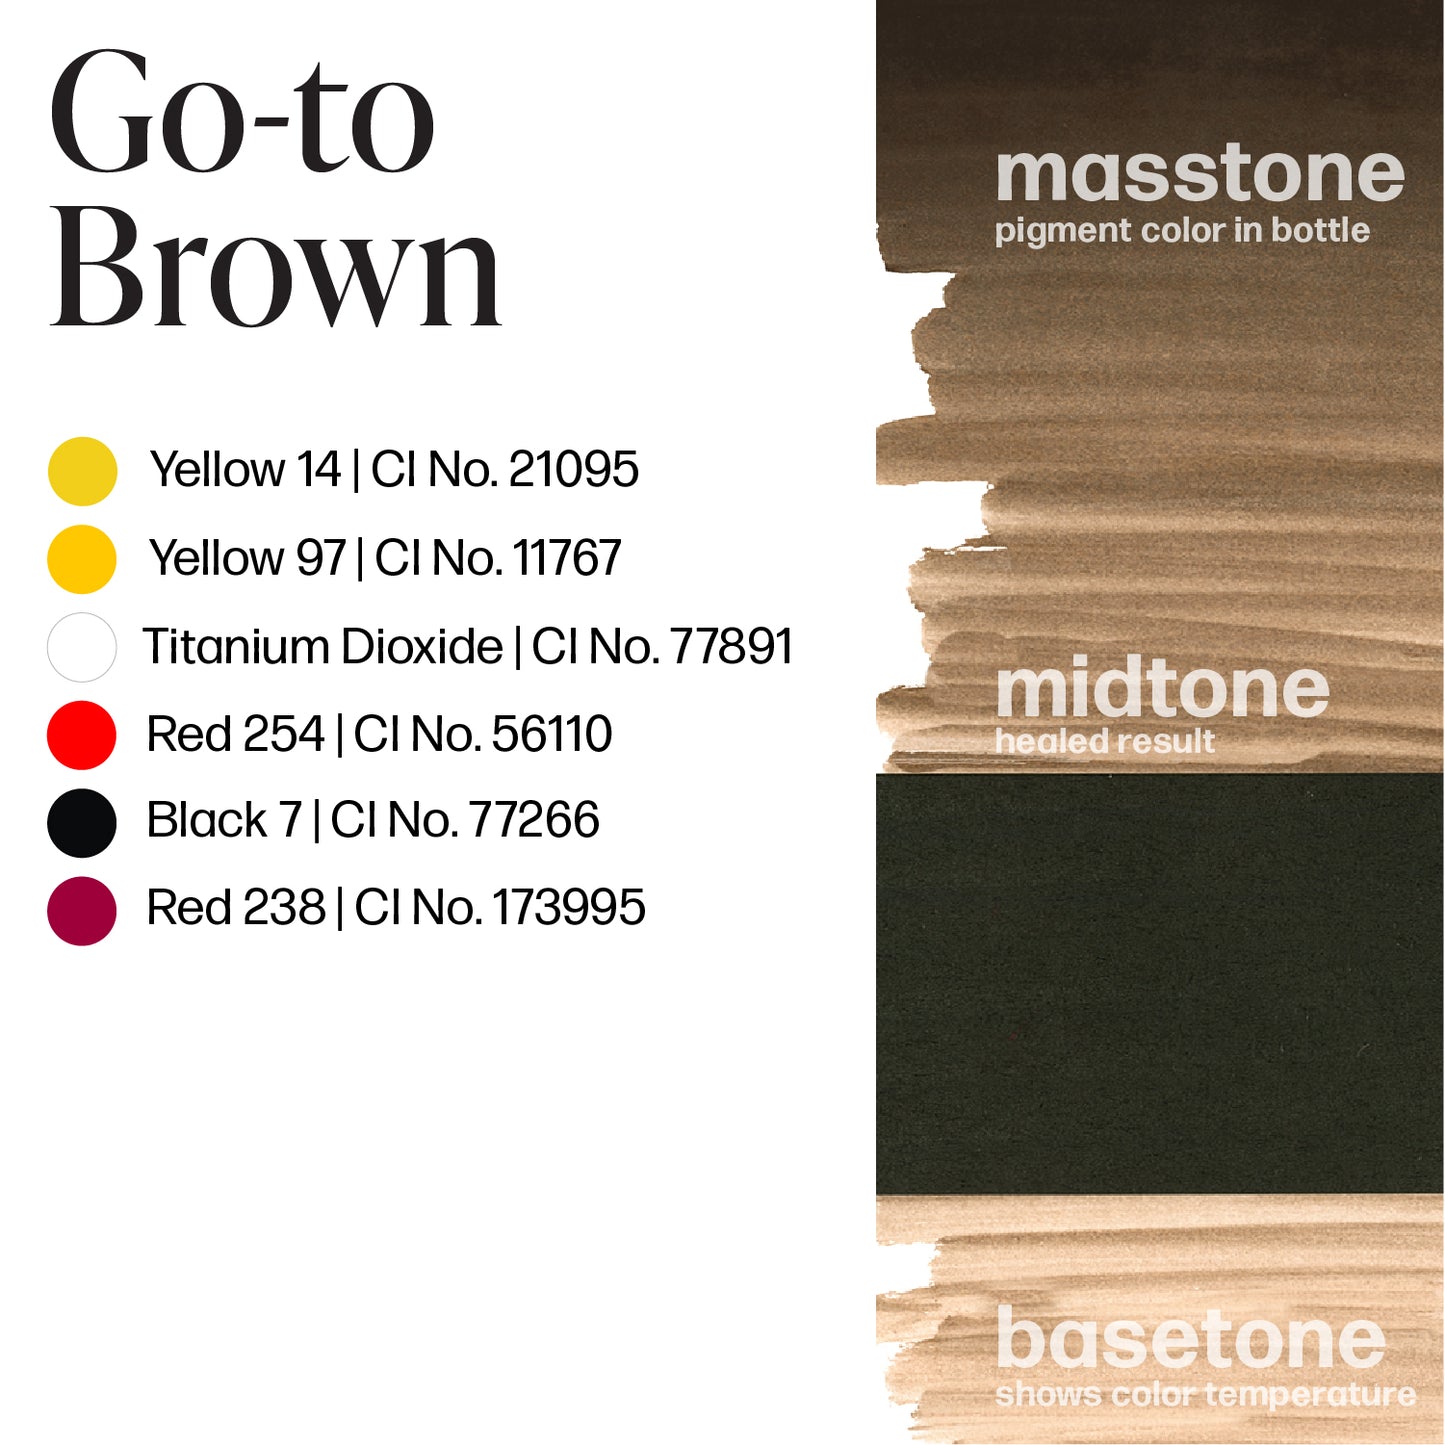 Go-To Brown